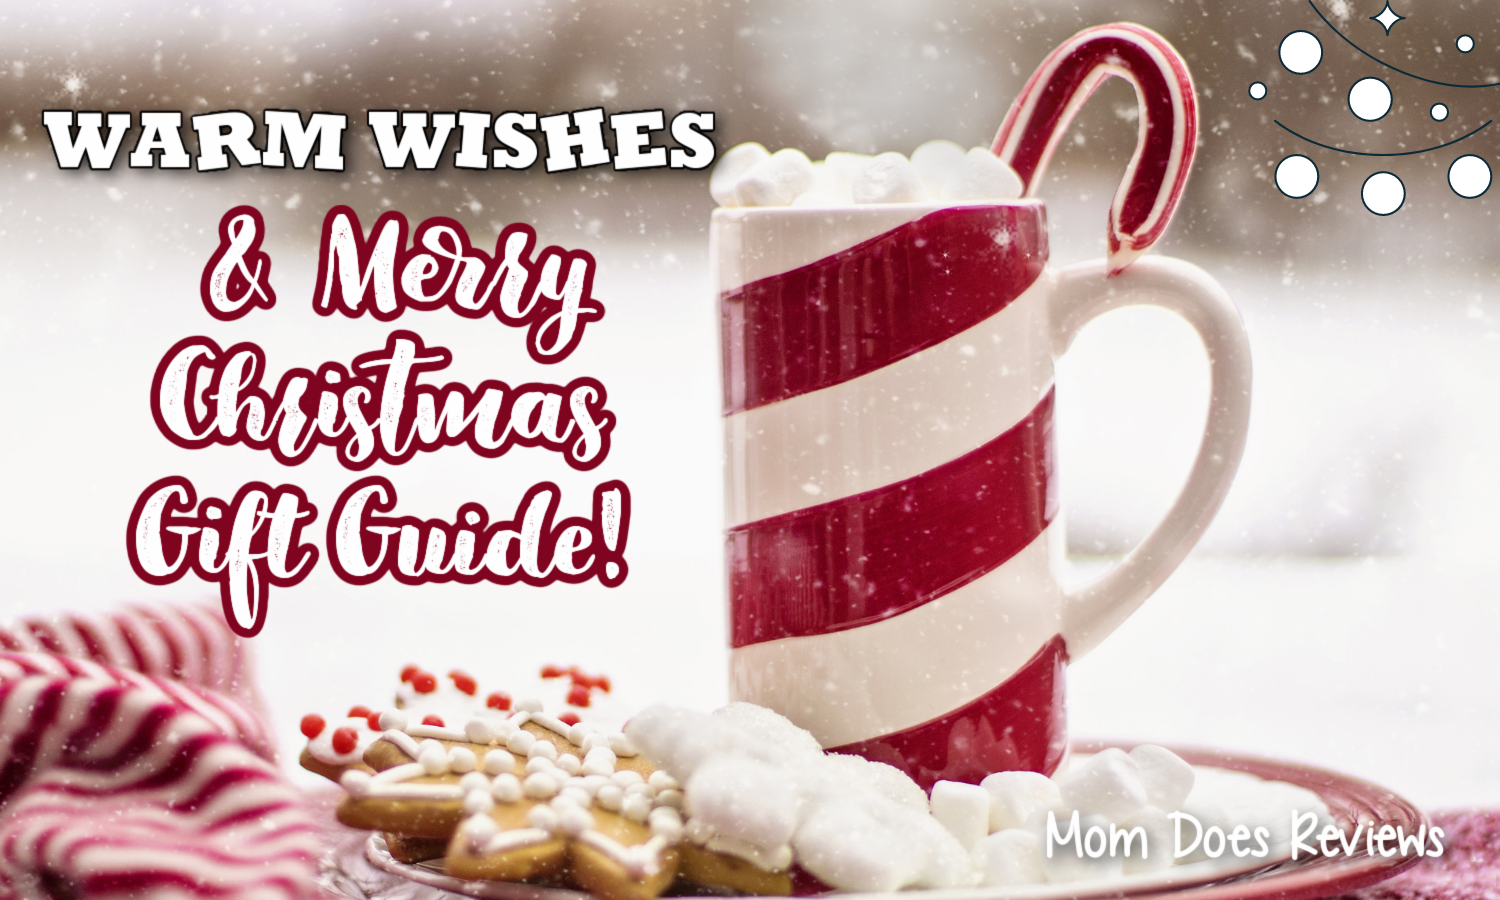 Warm Wishes & Merry Christmas Gift Guide #MegaChristmas21